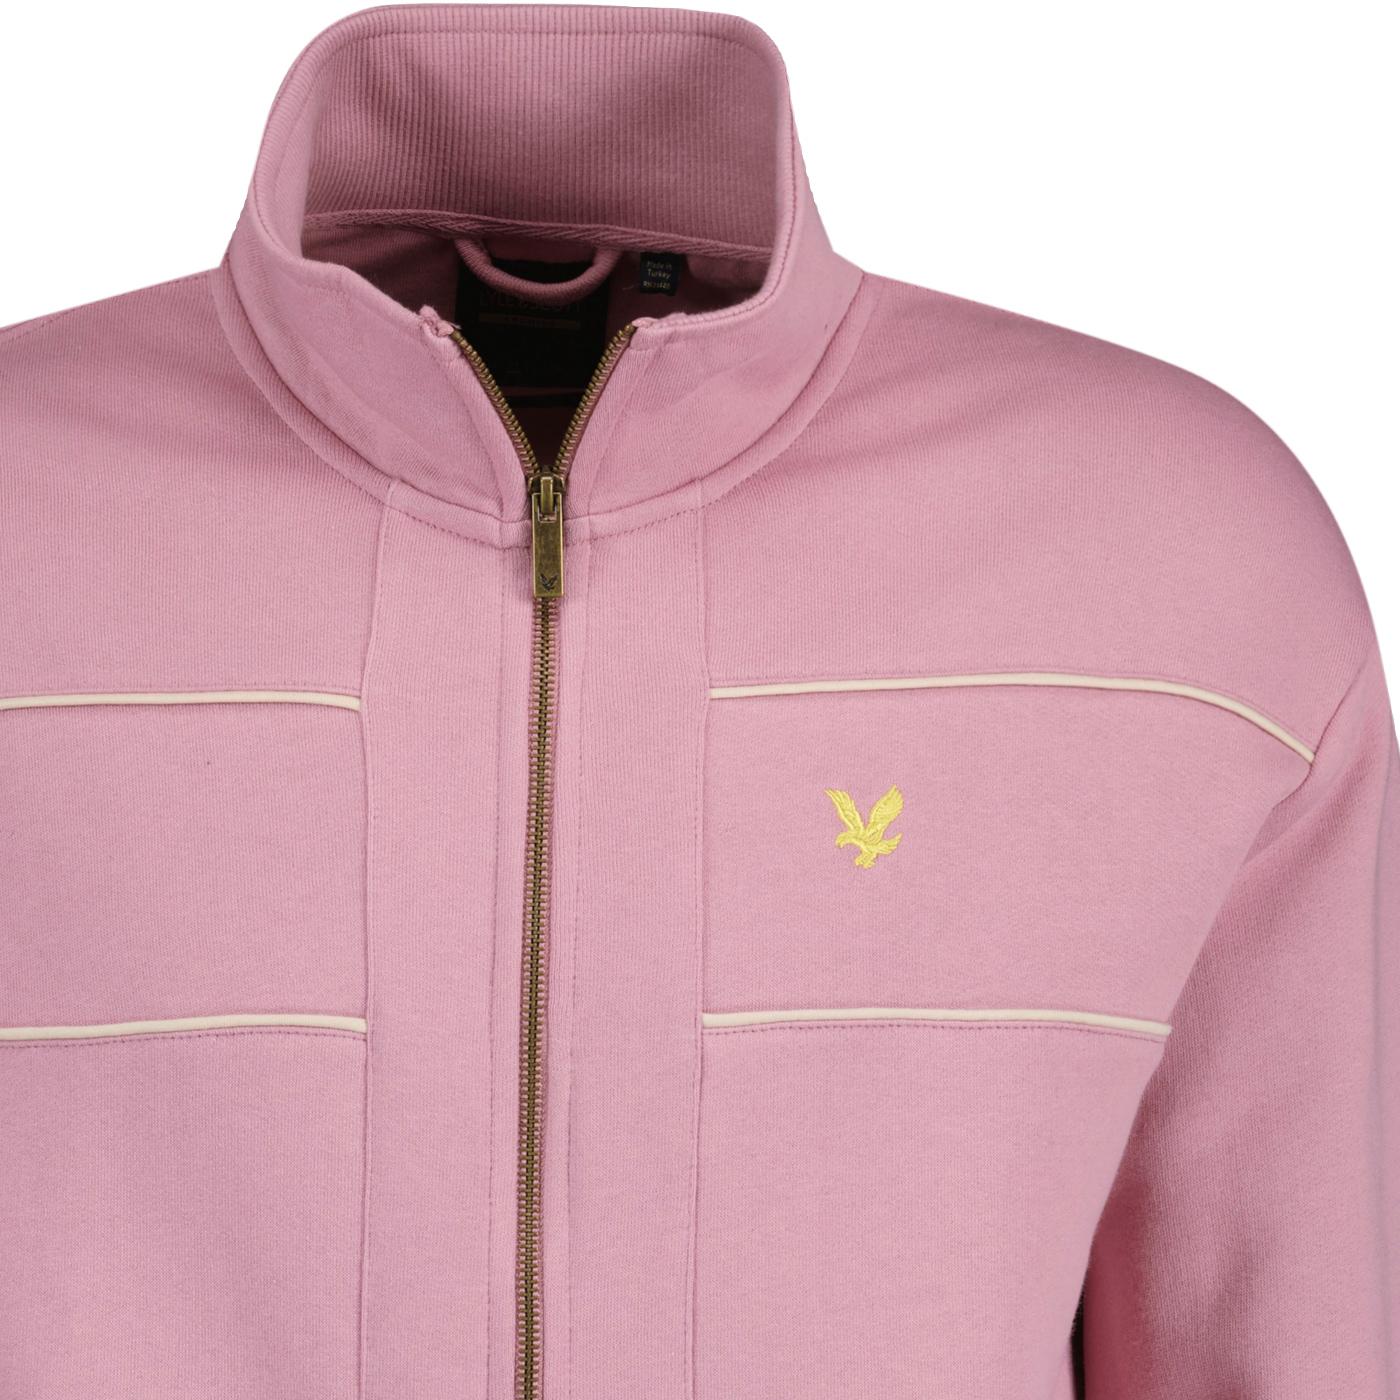 LYLE & SCOTT Archive Retro 90s Track Top Jacket in Pink